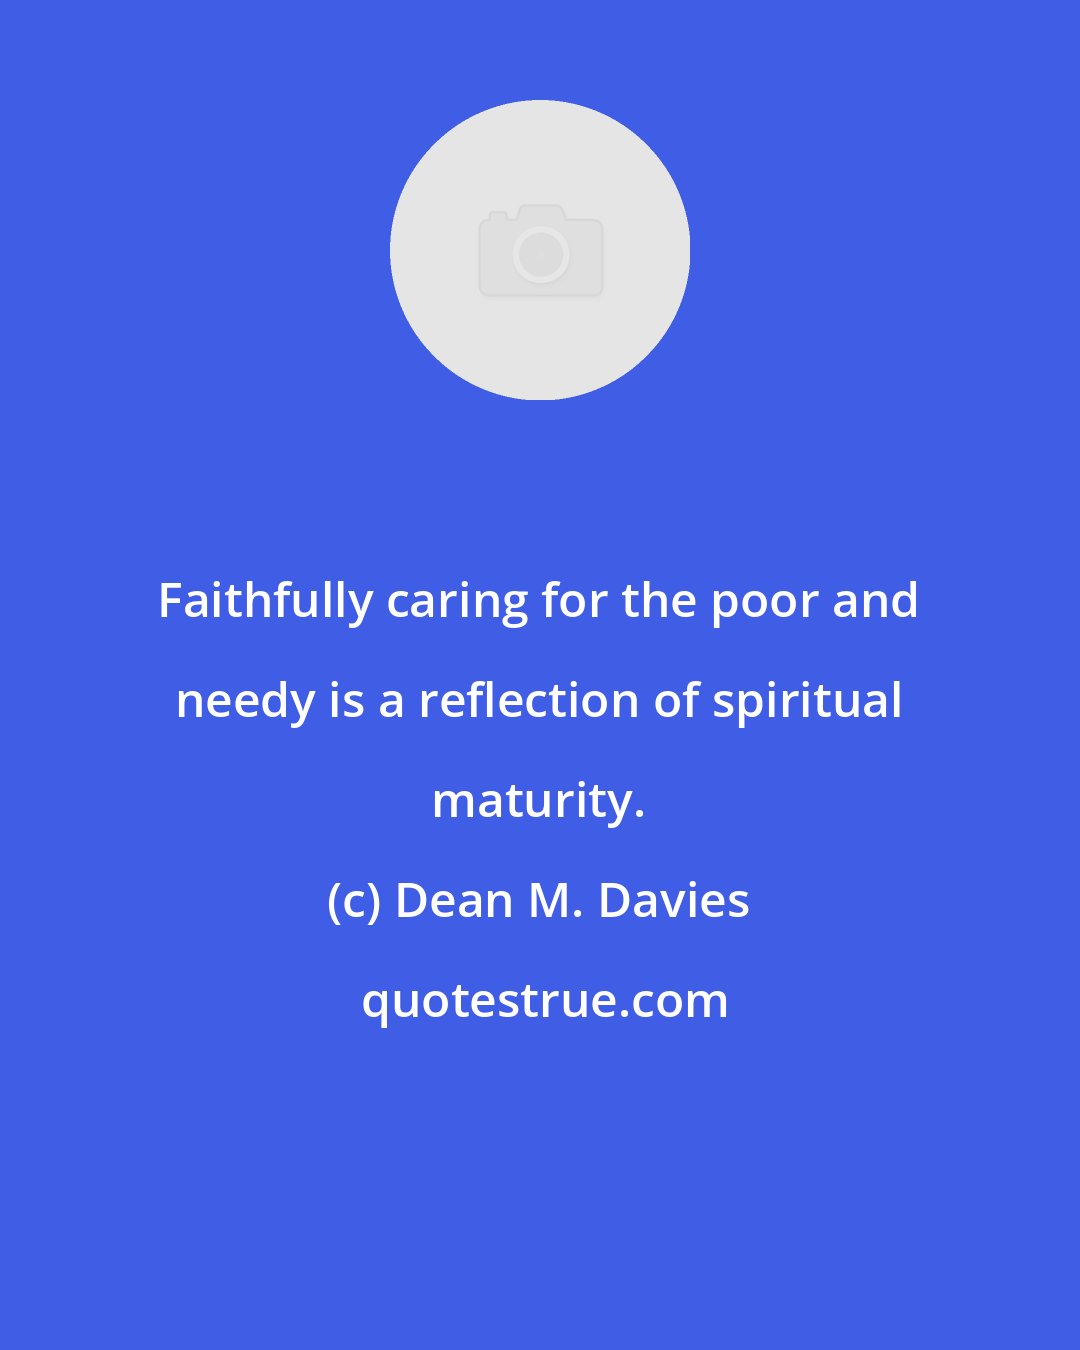 Dean M. Davies: Faithfully caring for the poor and needy is a reflection of spiritual maturity.